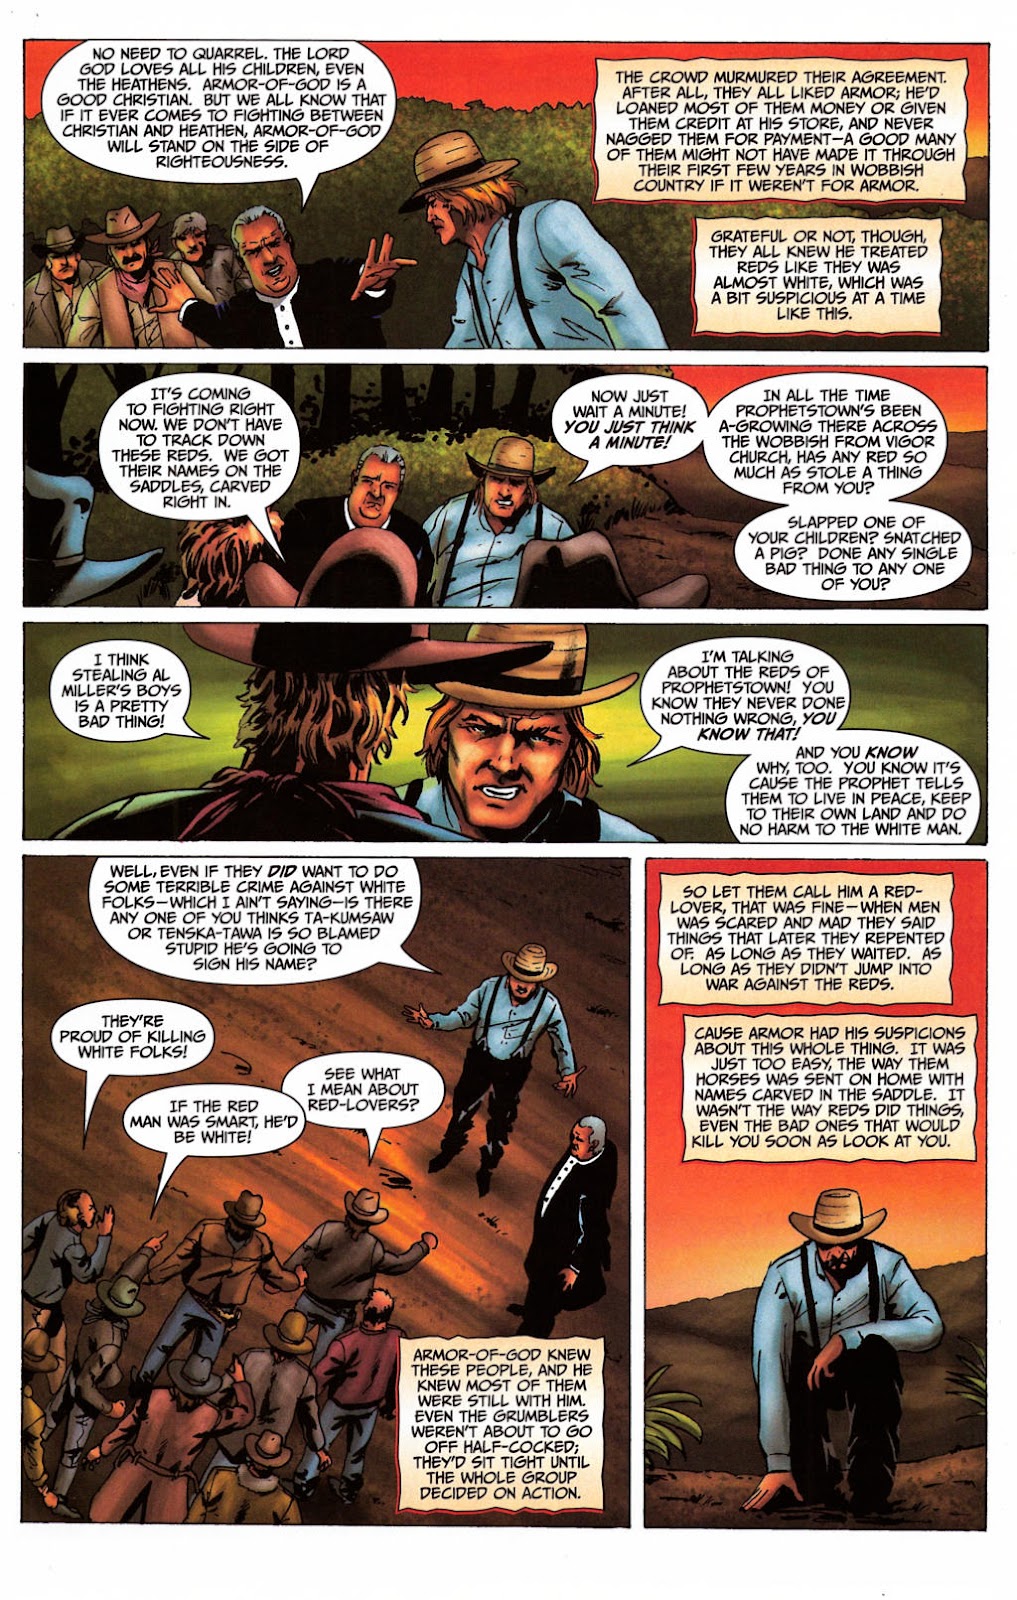 Red Prophet: The Tales of Alvin Maker issue 5 - Page 22